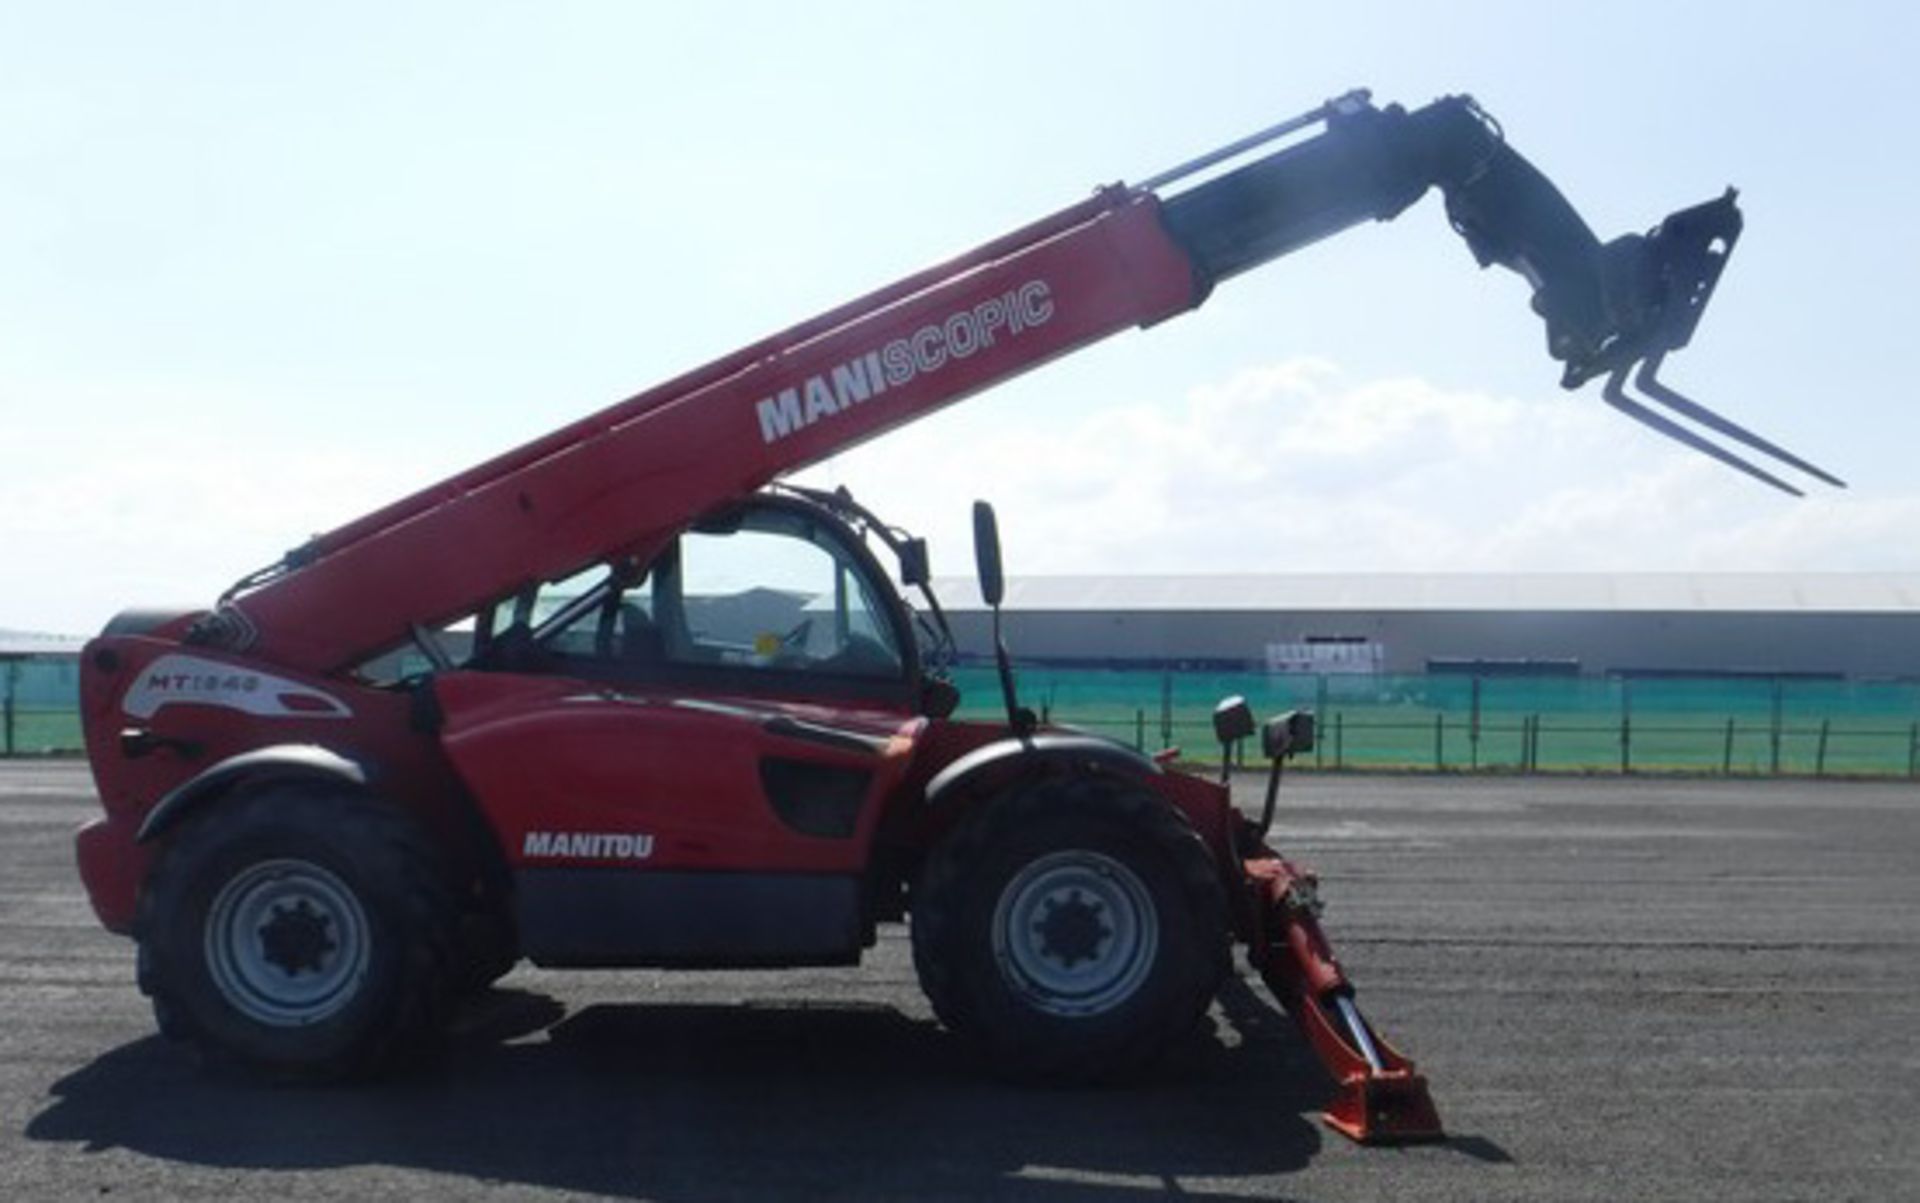 2009 MANITOU MT1840, Reg - SY59CFK. S/N - 258408. 4209 hrs (not verified). C/W set of forks - Image 9 of 13